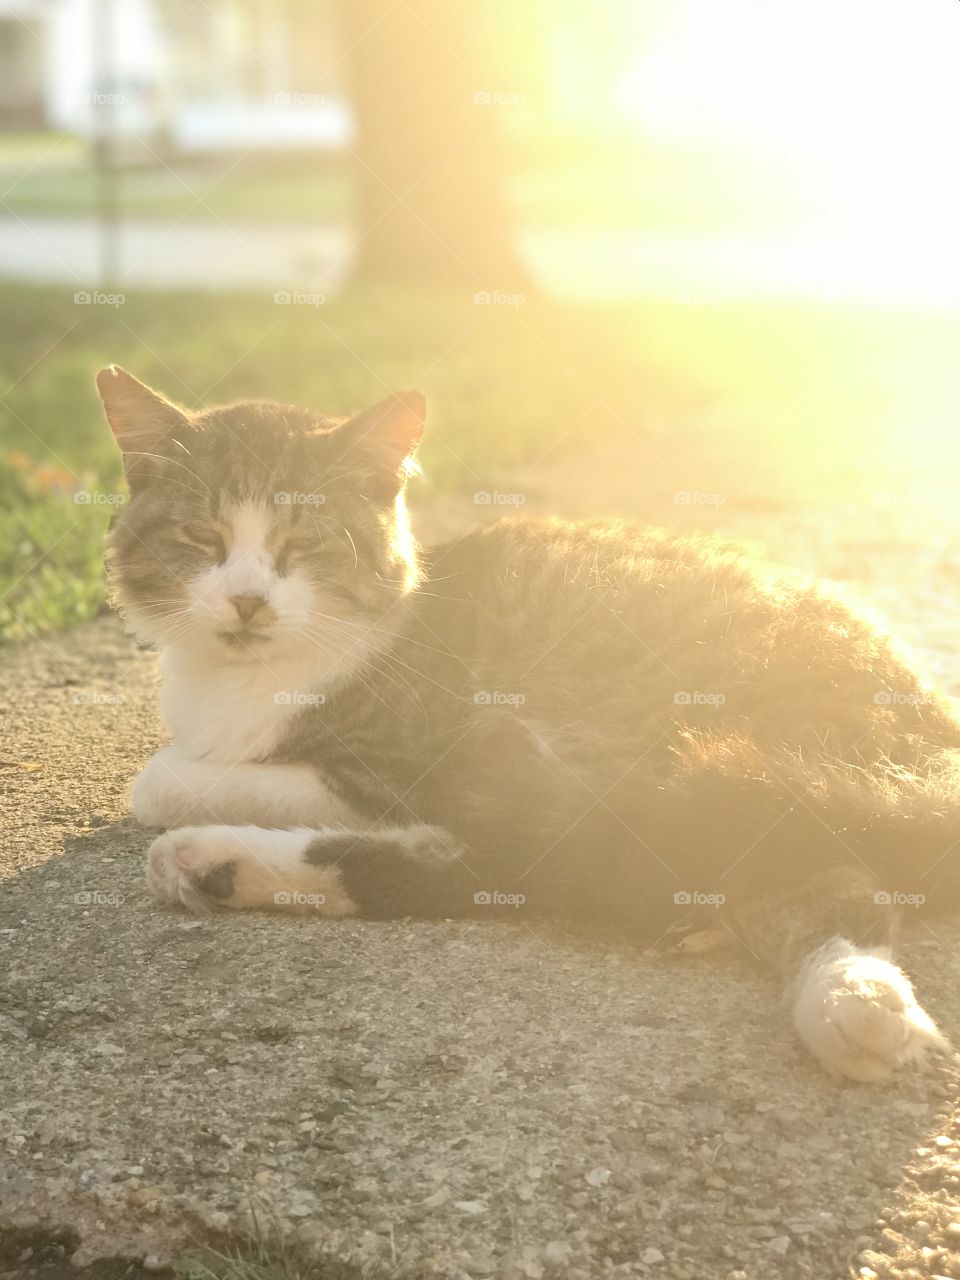 Lazy cat relaxing in the sunshine
